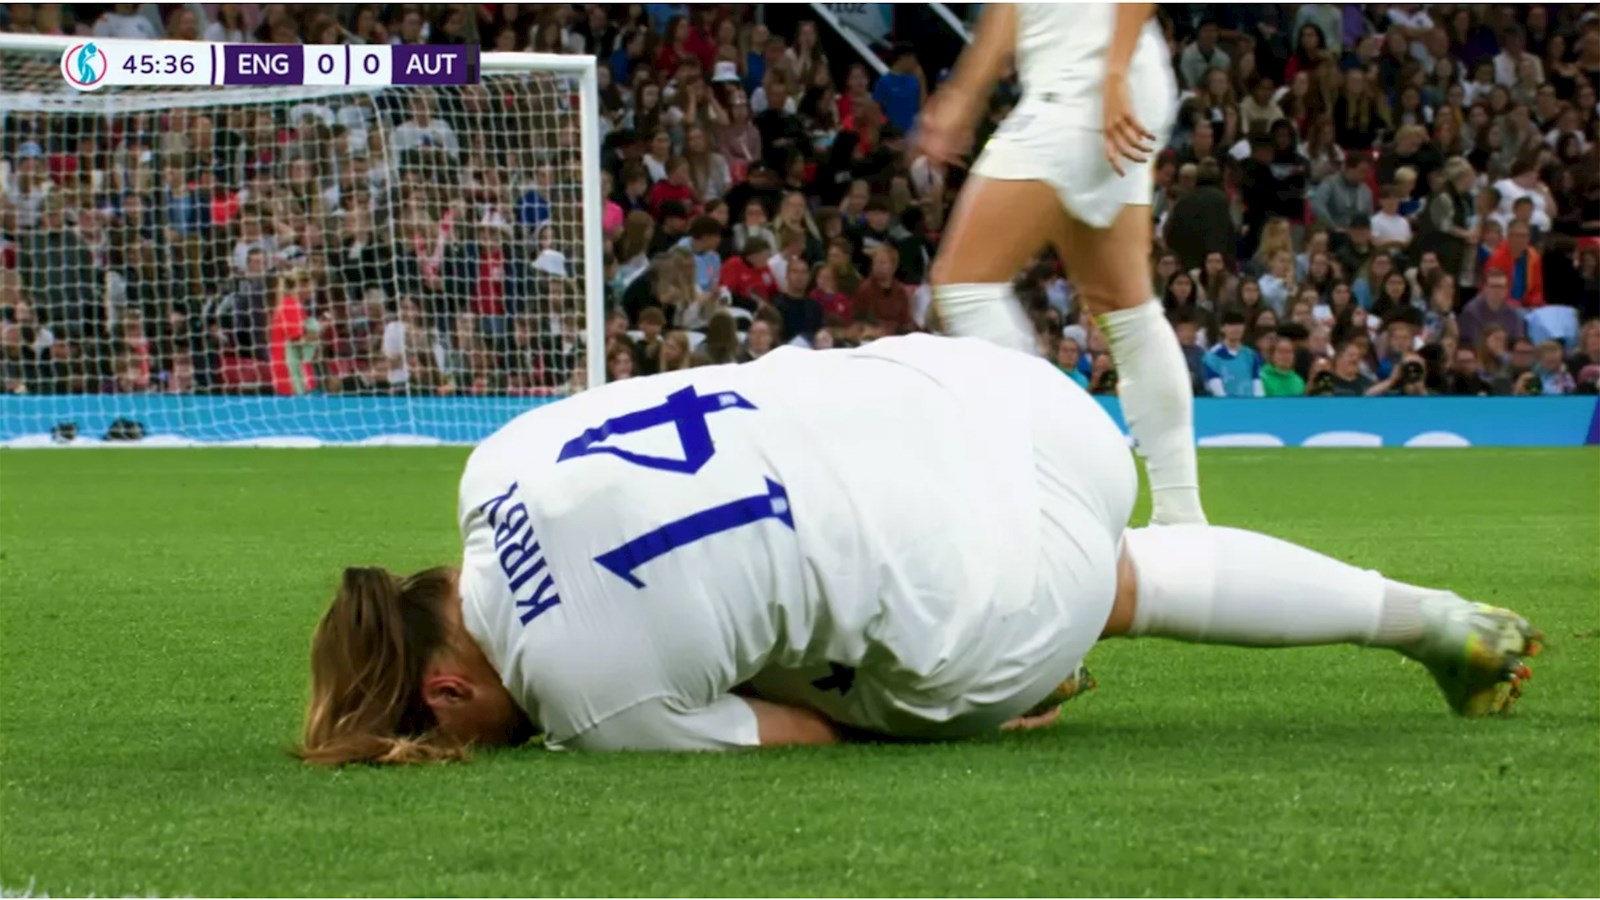 England Women's football player Fran Kirkby on the ground after being injured